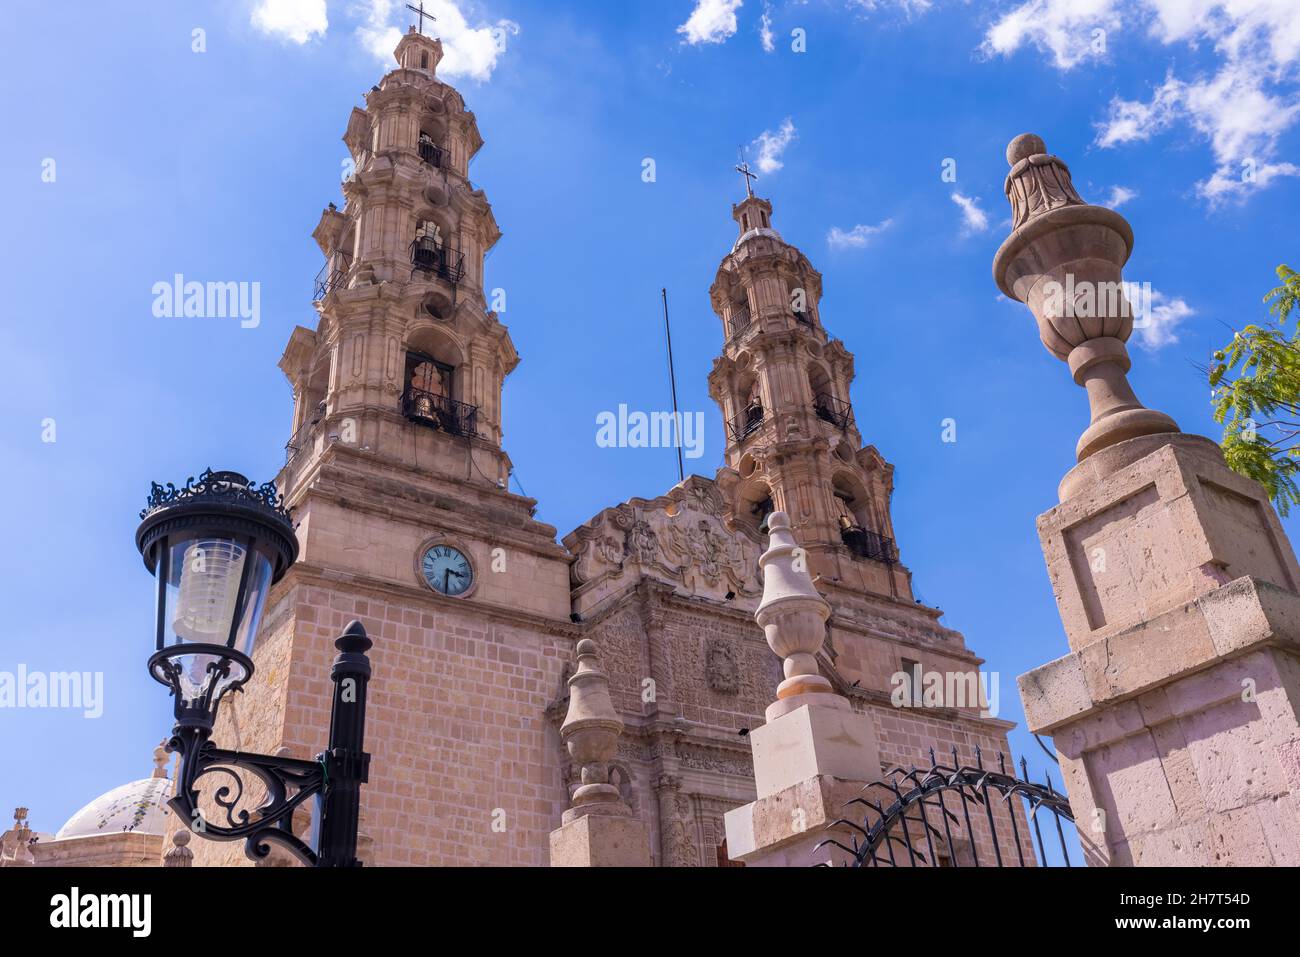 Mexico, Aguascalientes Cathedral Basilica of Our Lady of the Assumption in historic city center located at Plaza de la Patria. Stock Photo